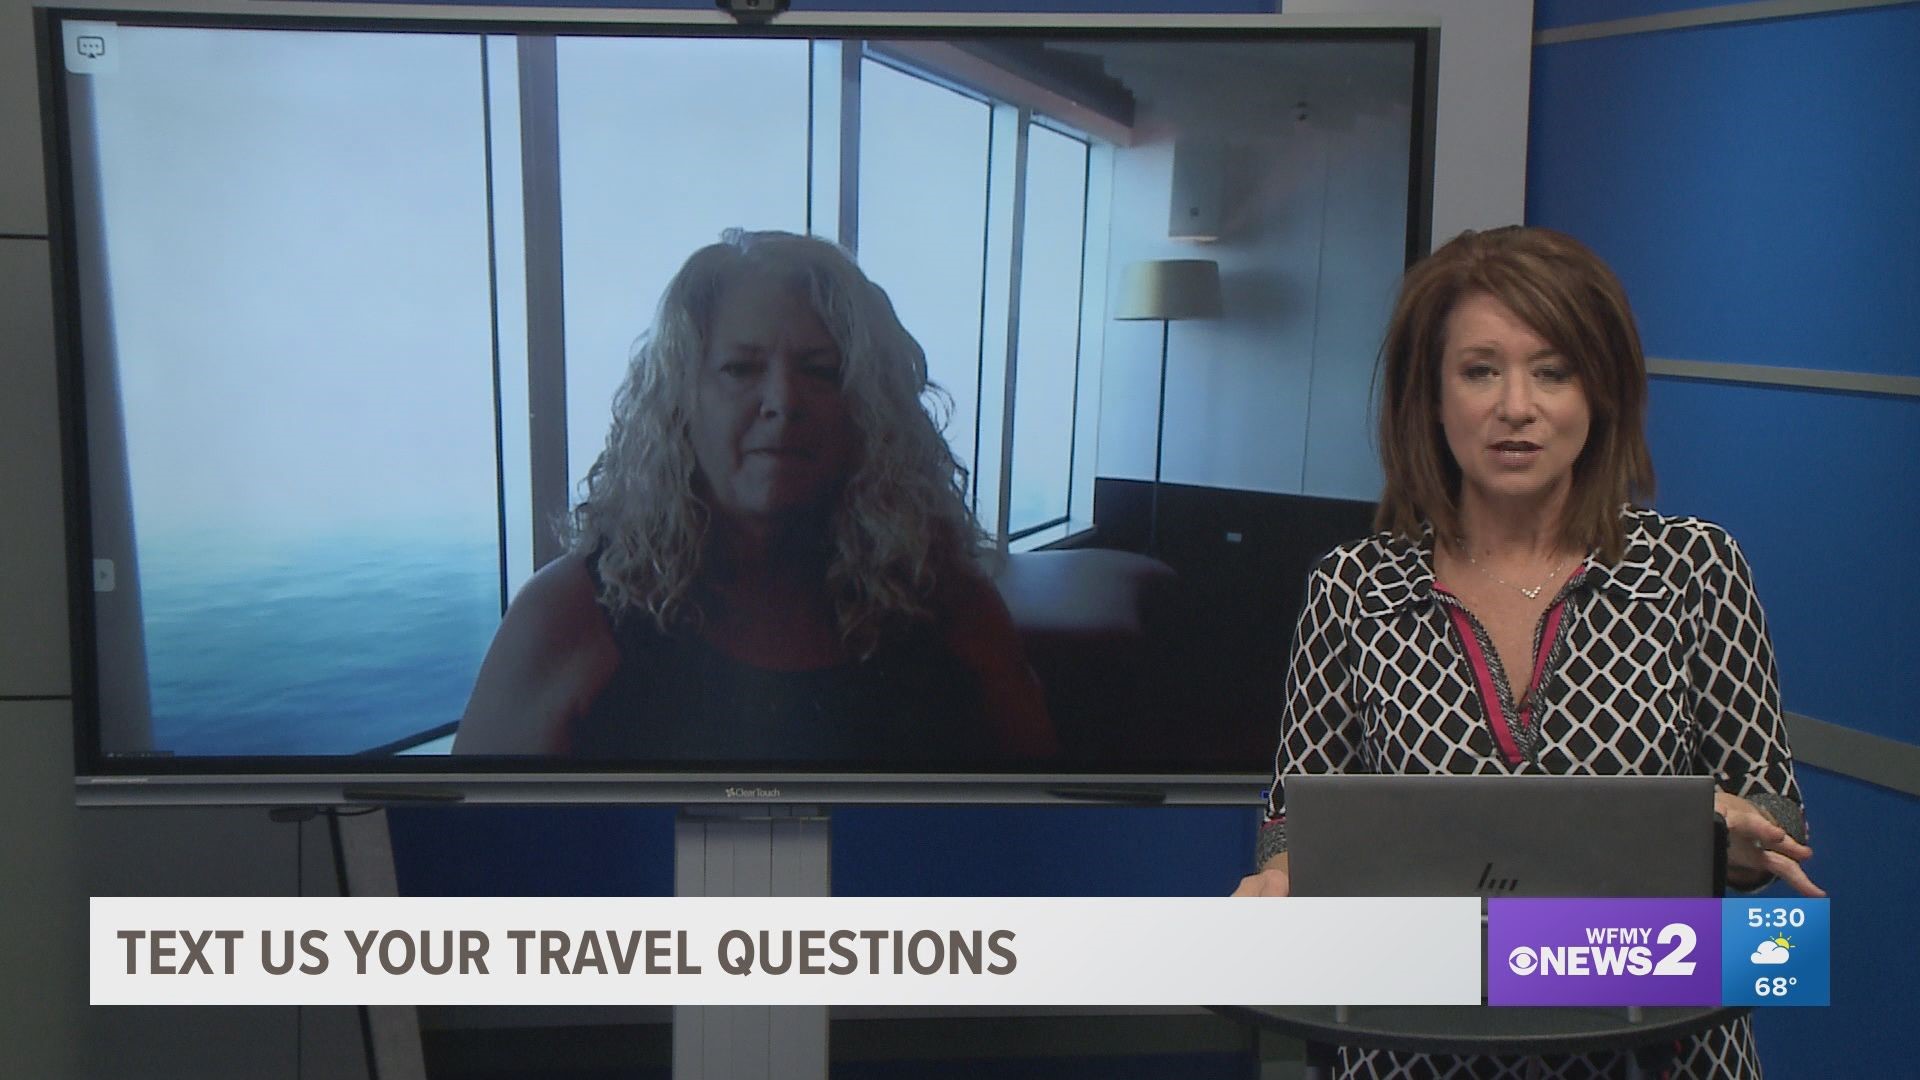 Ginny Maurer from Cruise Planners joins us to answer your questions.